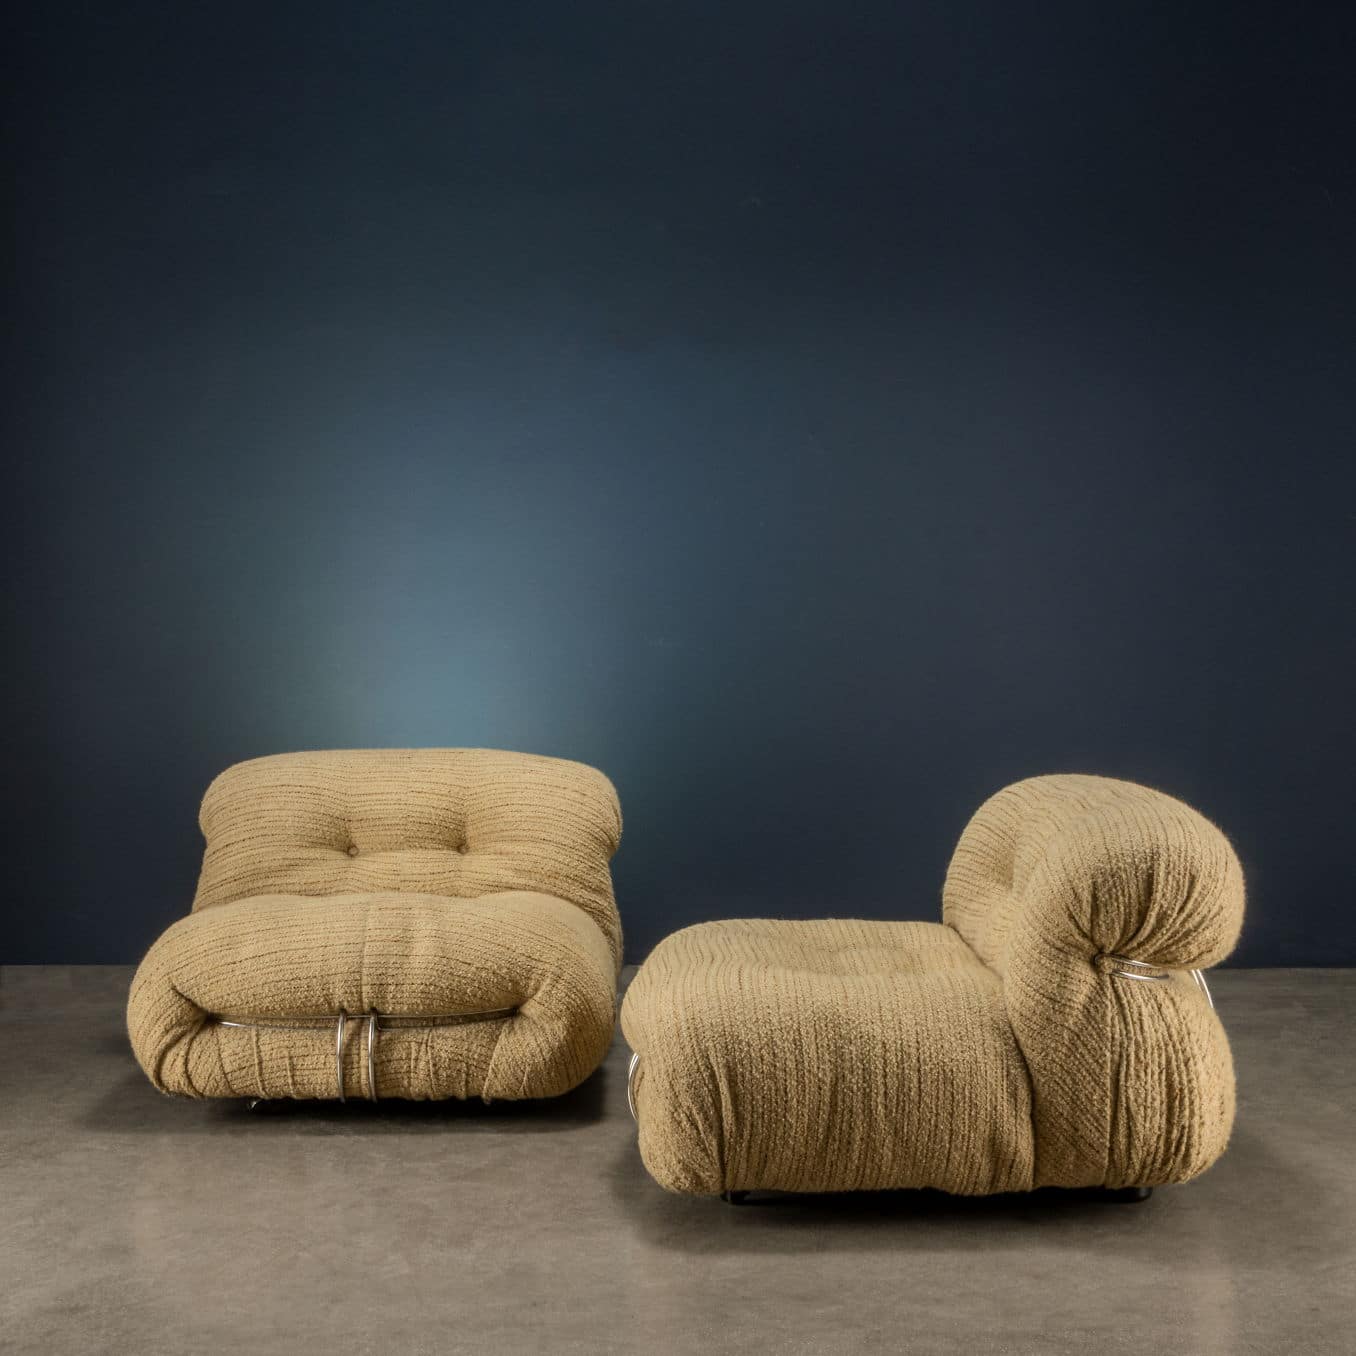 Two ‘Soriana’ armchairs, Afra & Tobia Scarpa for Cassina